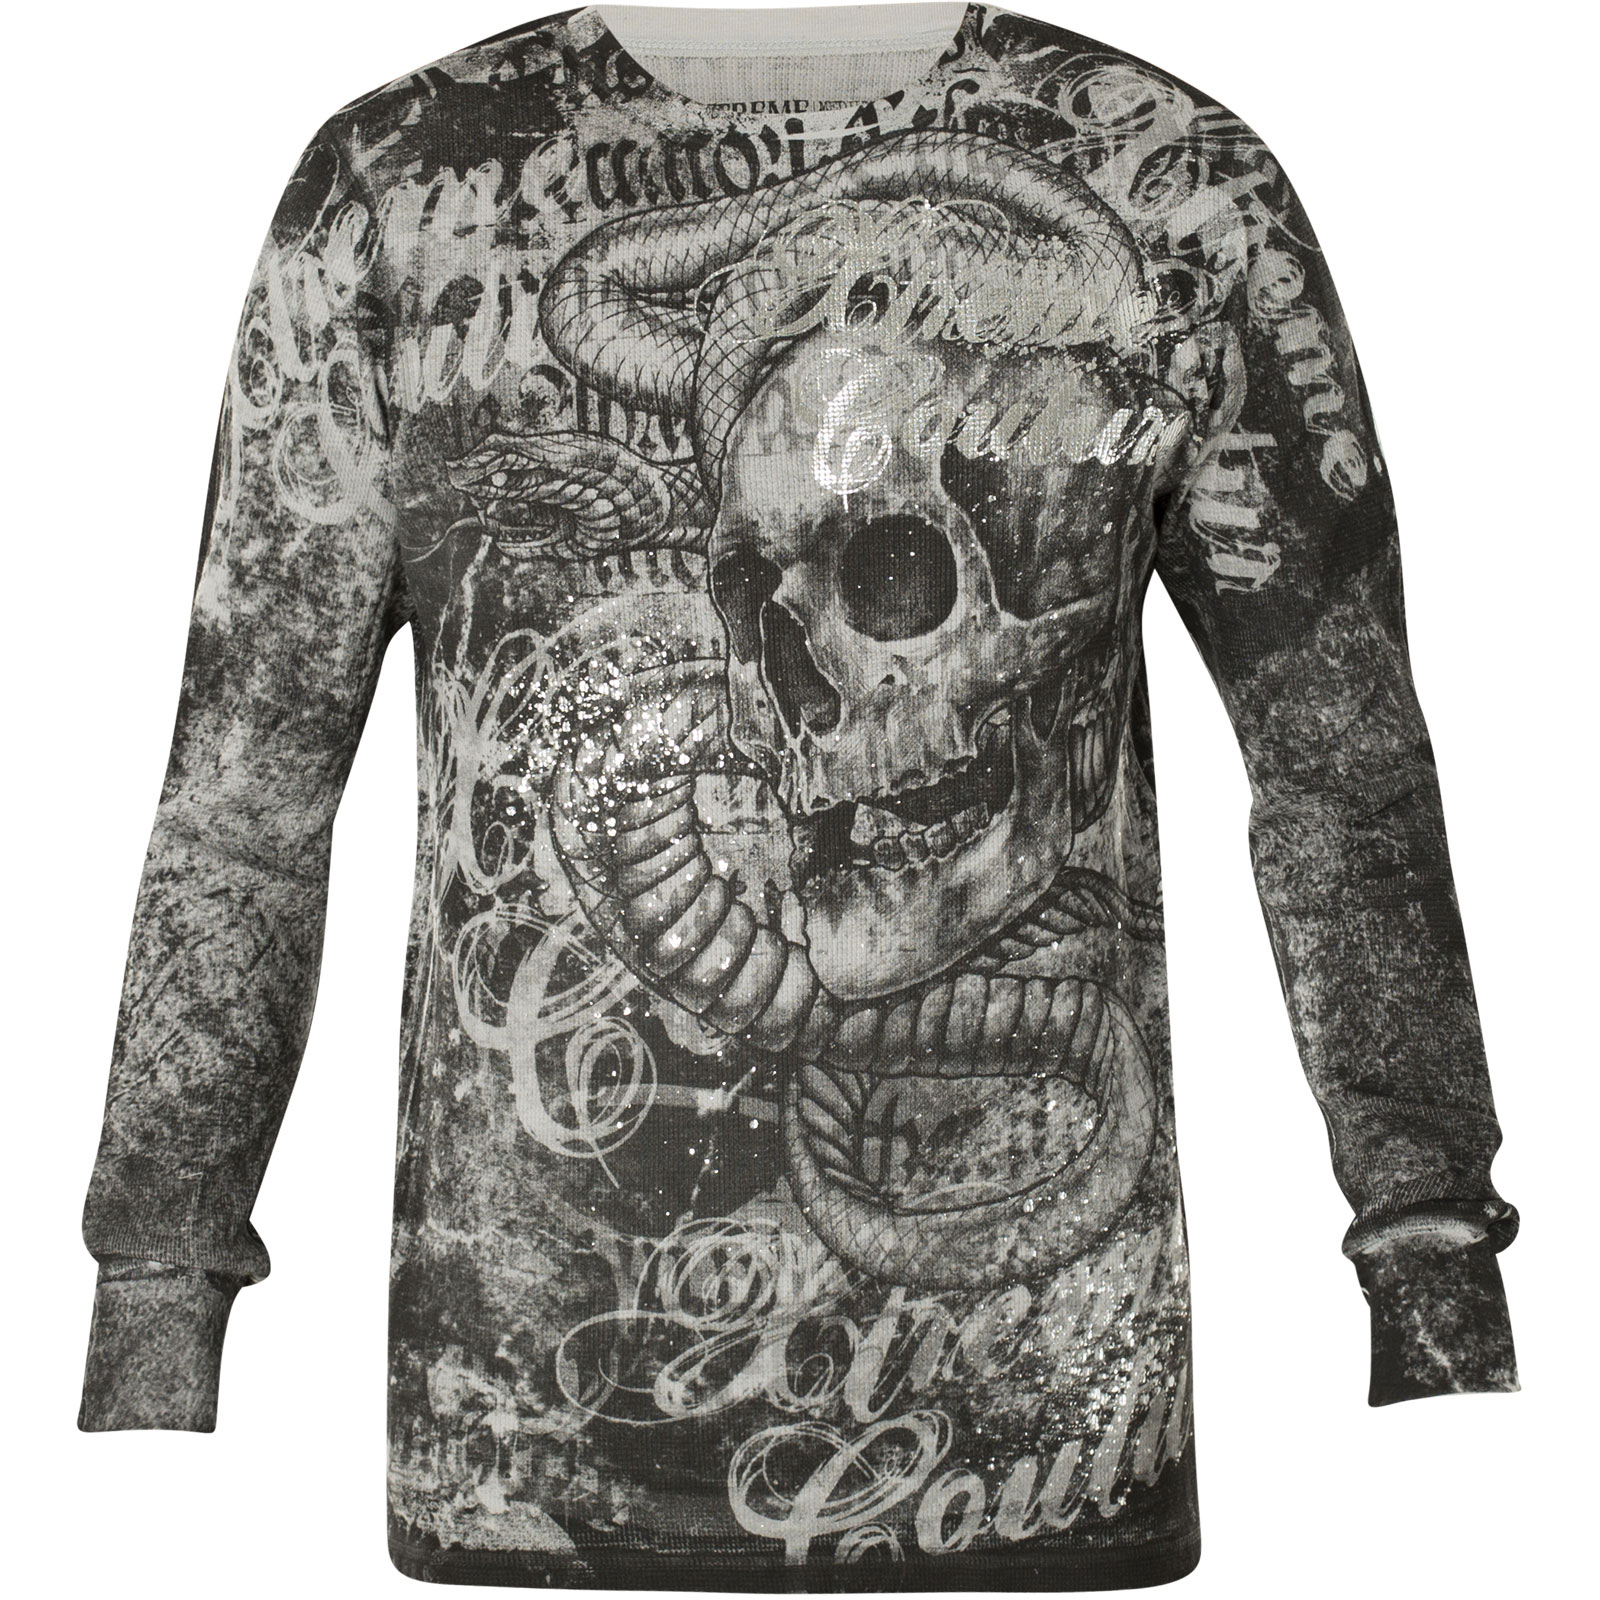 Xtreme Couture by Affliction Thermal Toothache with lettering